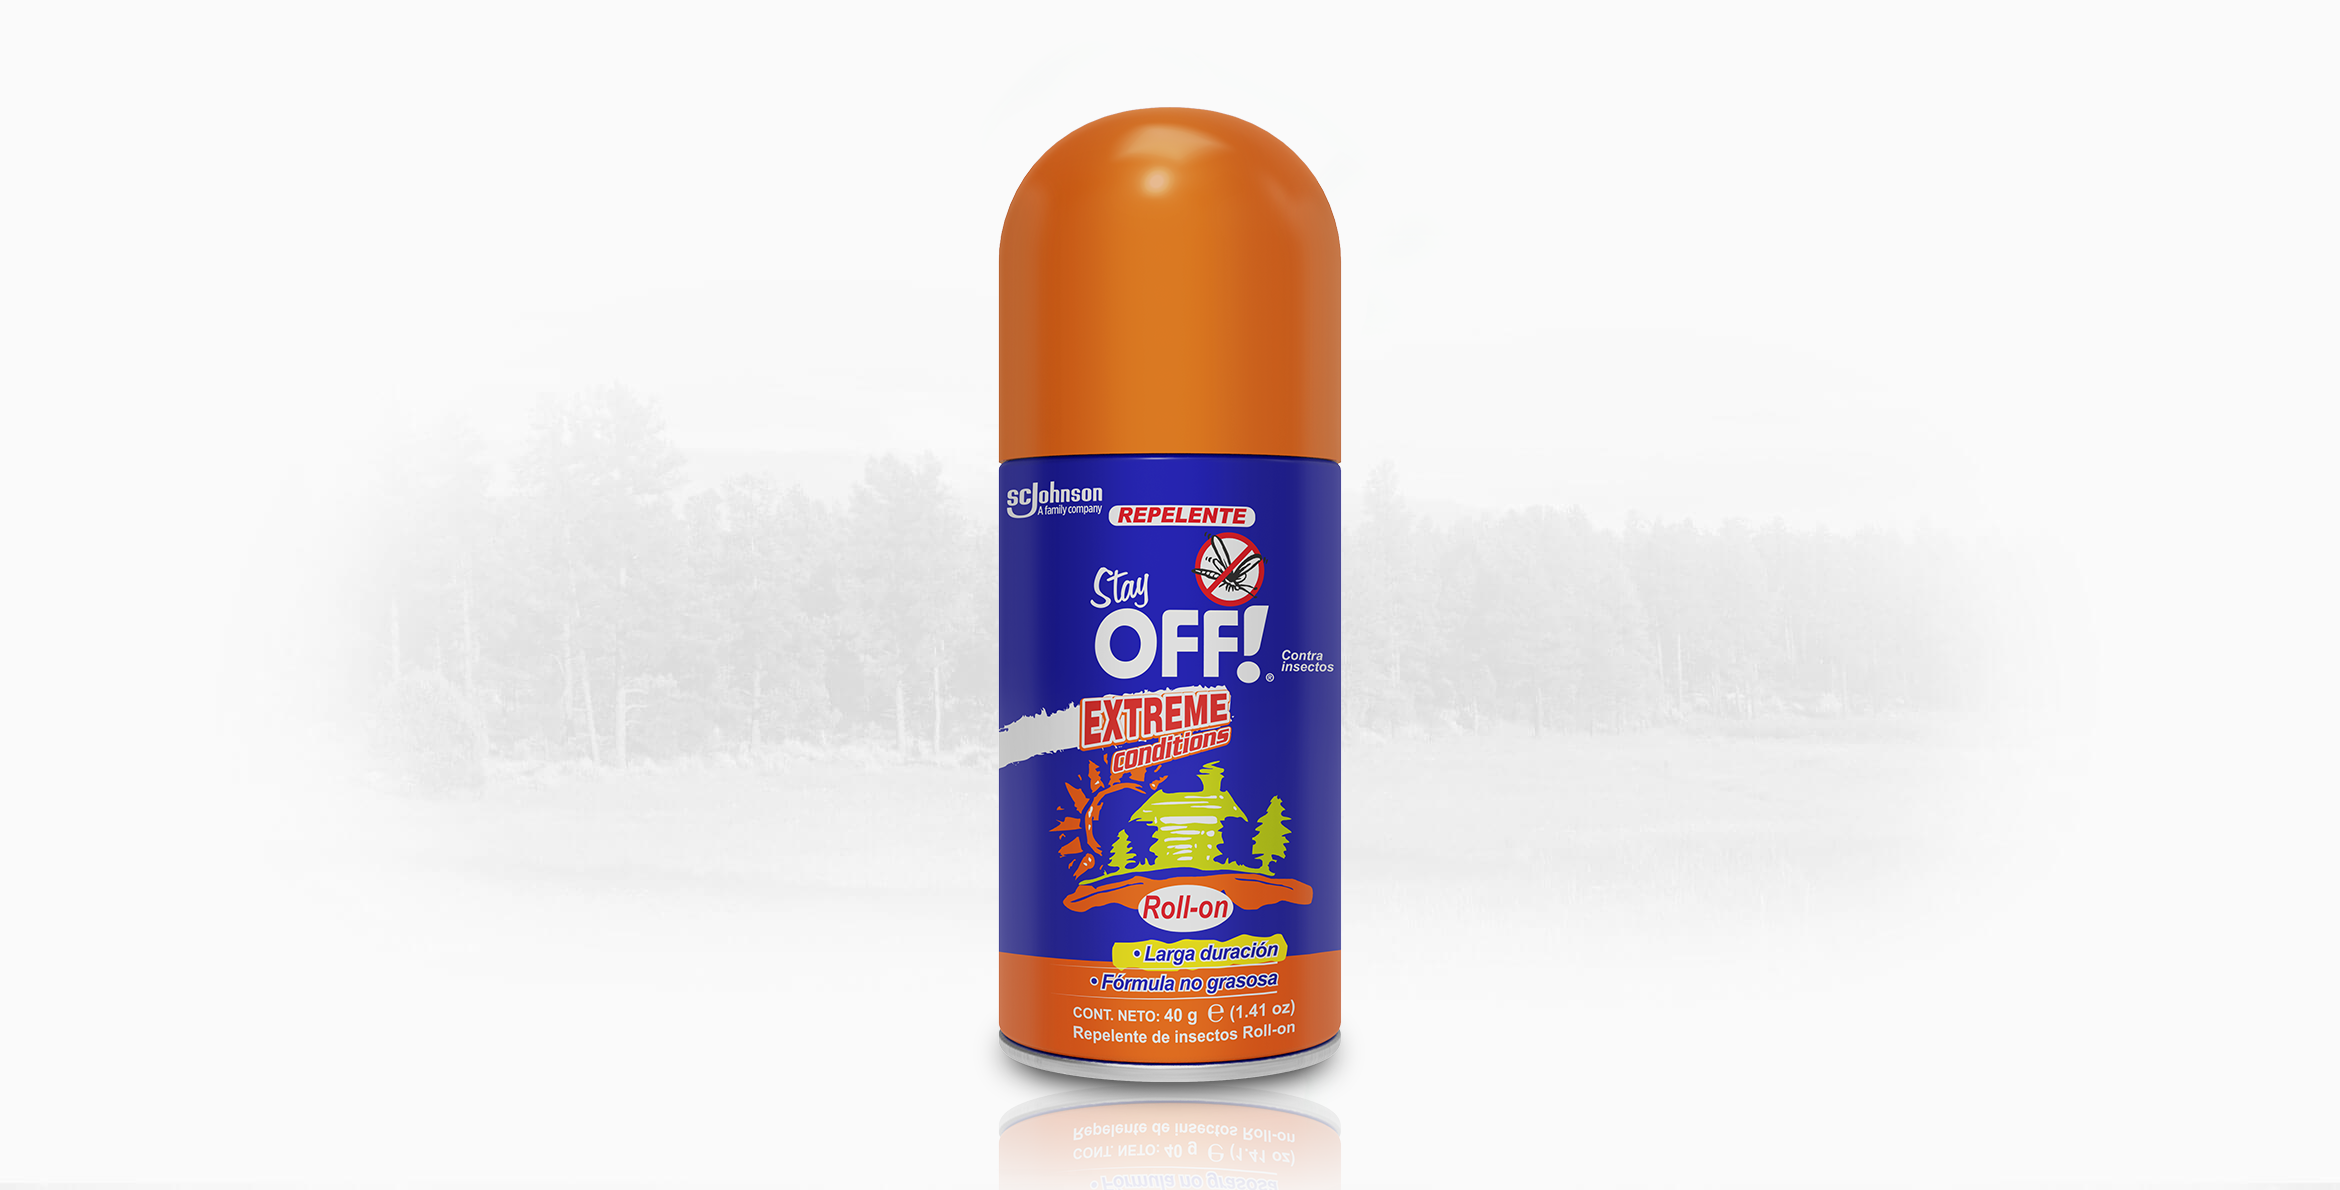 Stay OFF!® Extreme Conditions Repelente de insectos en Roll on 40 g